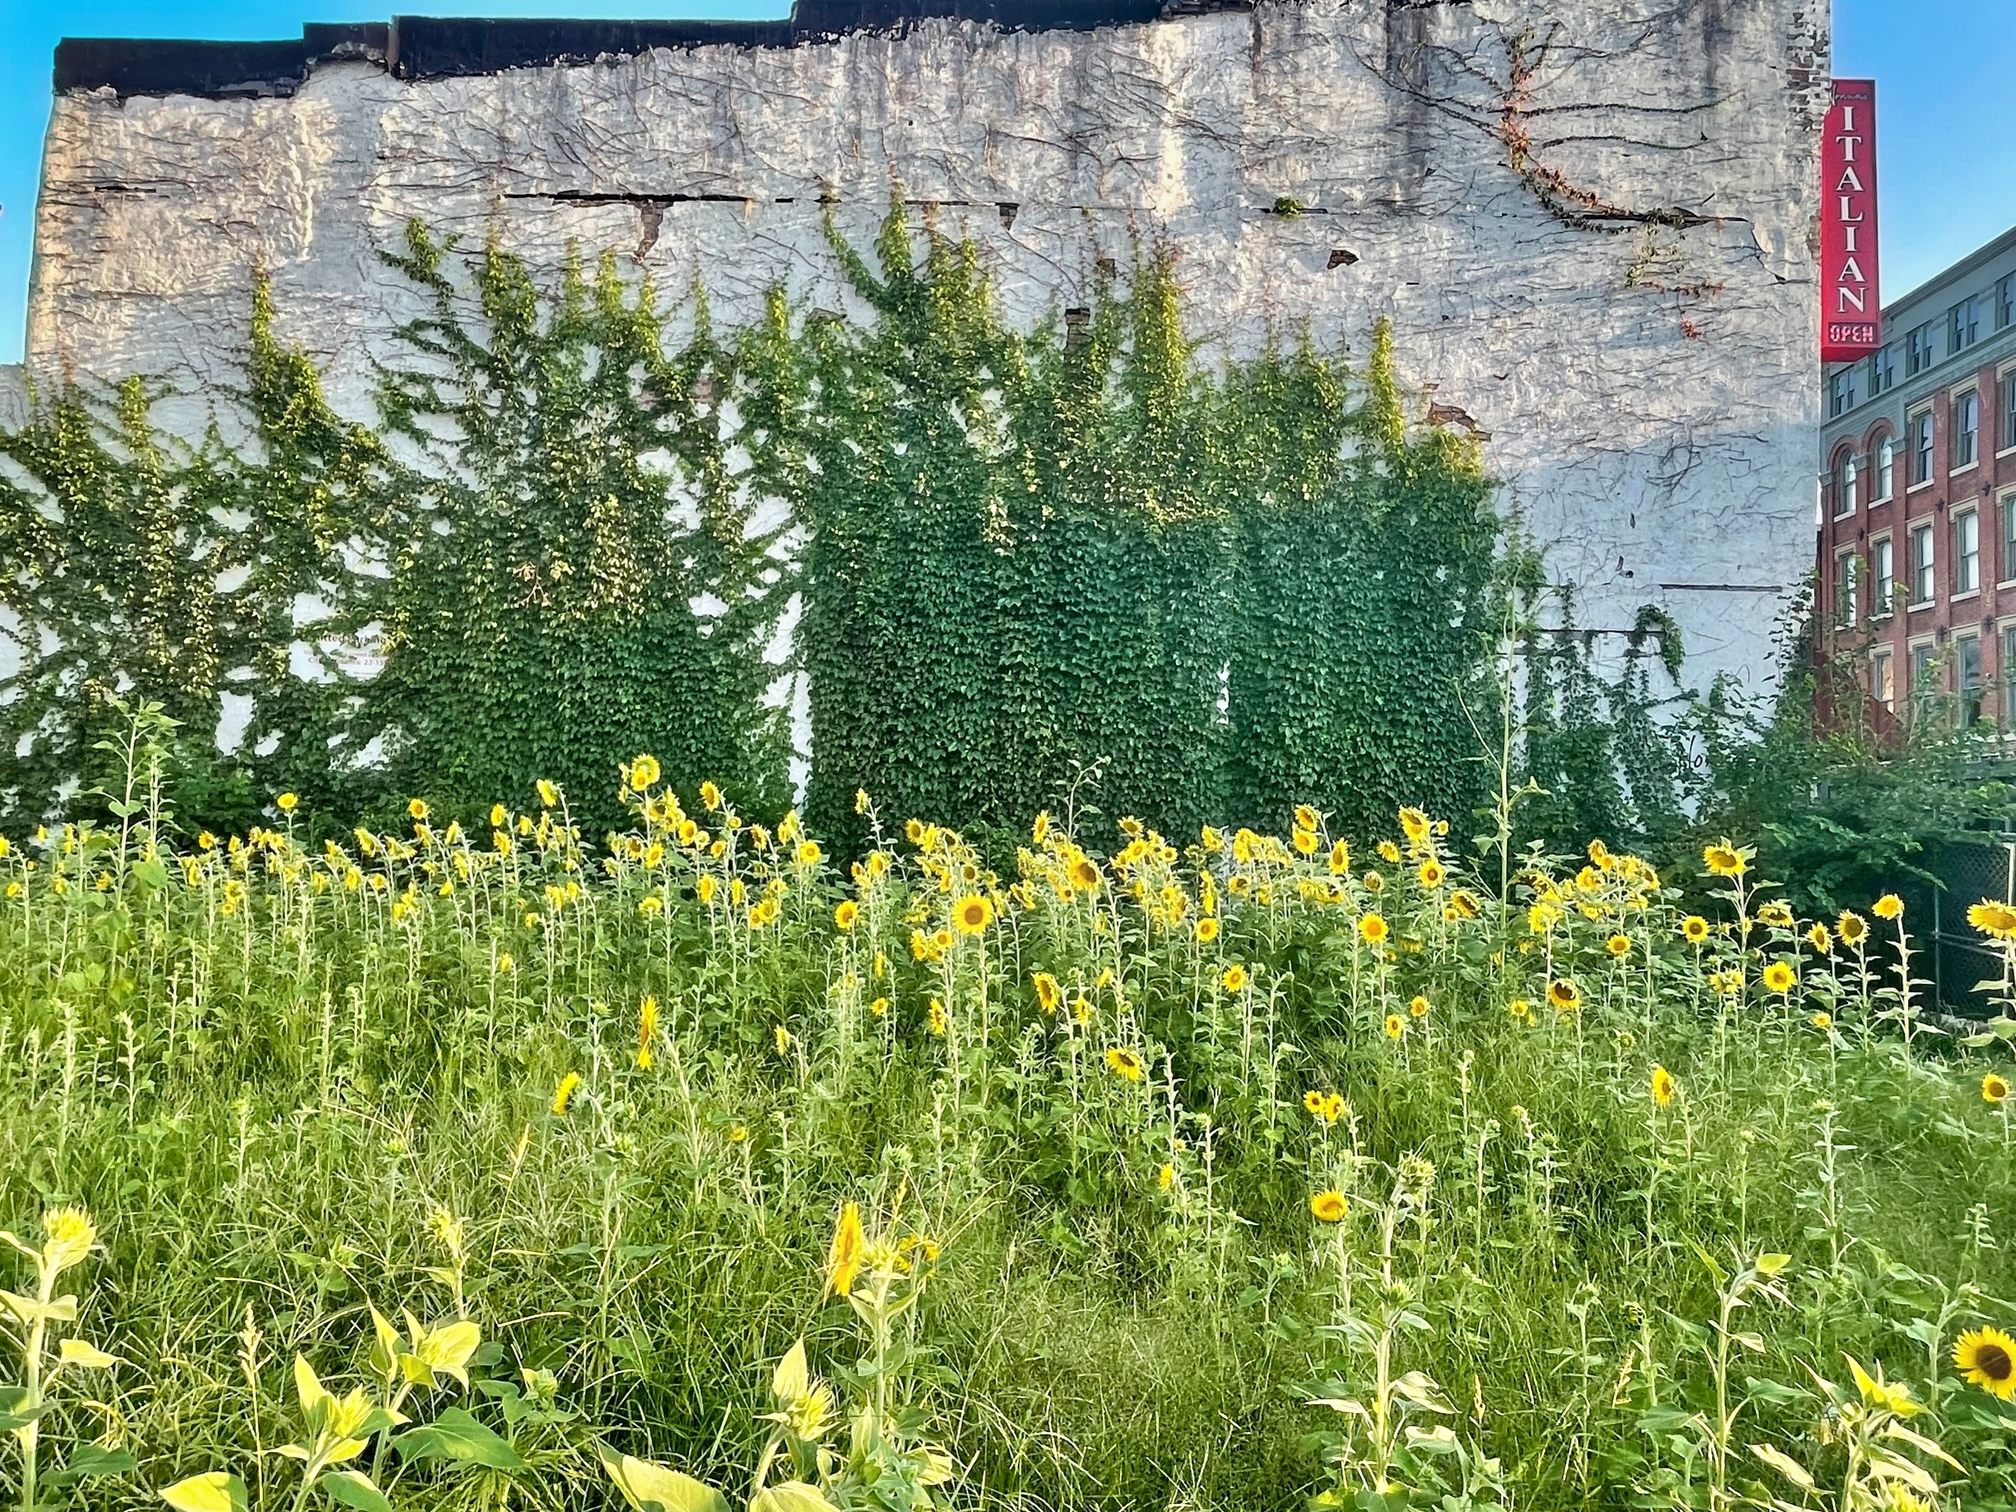 Someone planted hundreds of sunflowers on an empty Downtown Springfield lot